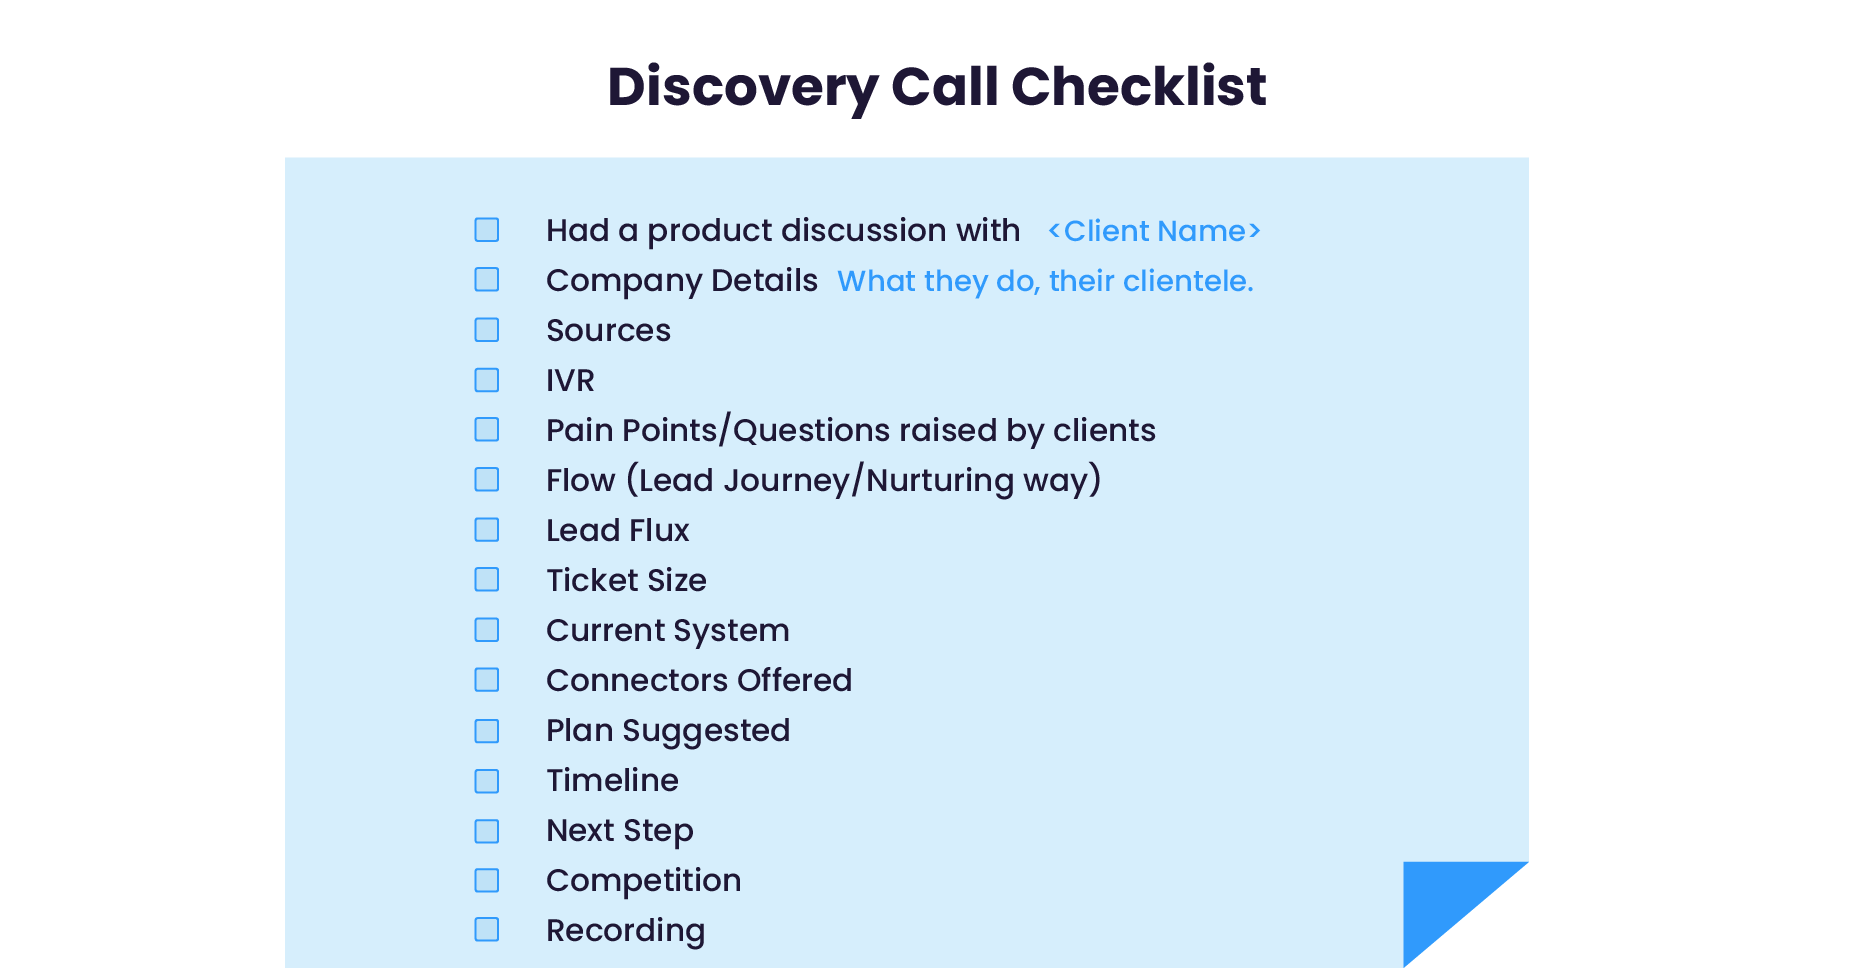 Discovery call checklist example